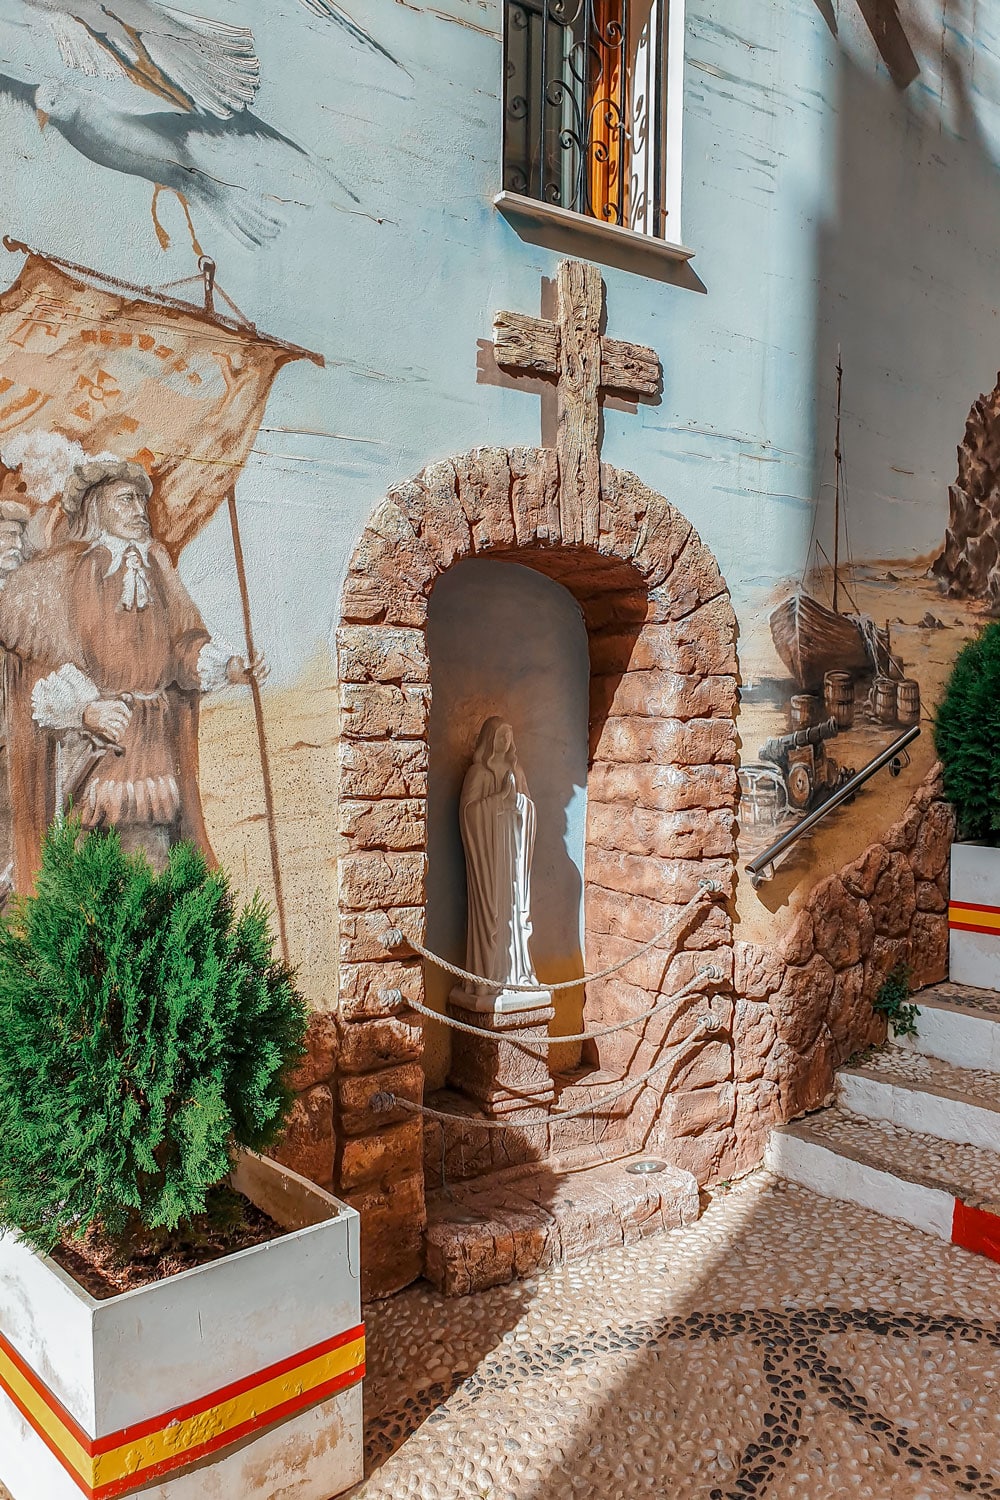 A beautiful wall painting and a holy statue built into the wall.